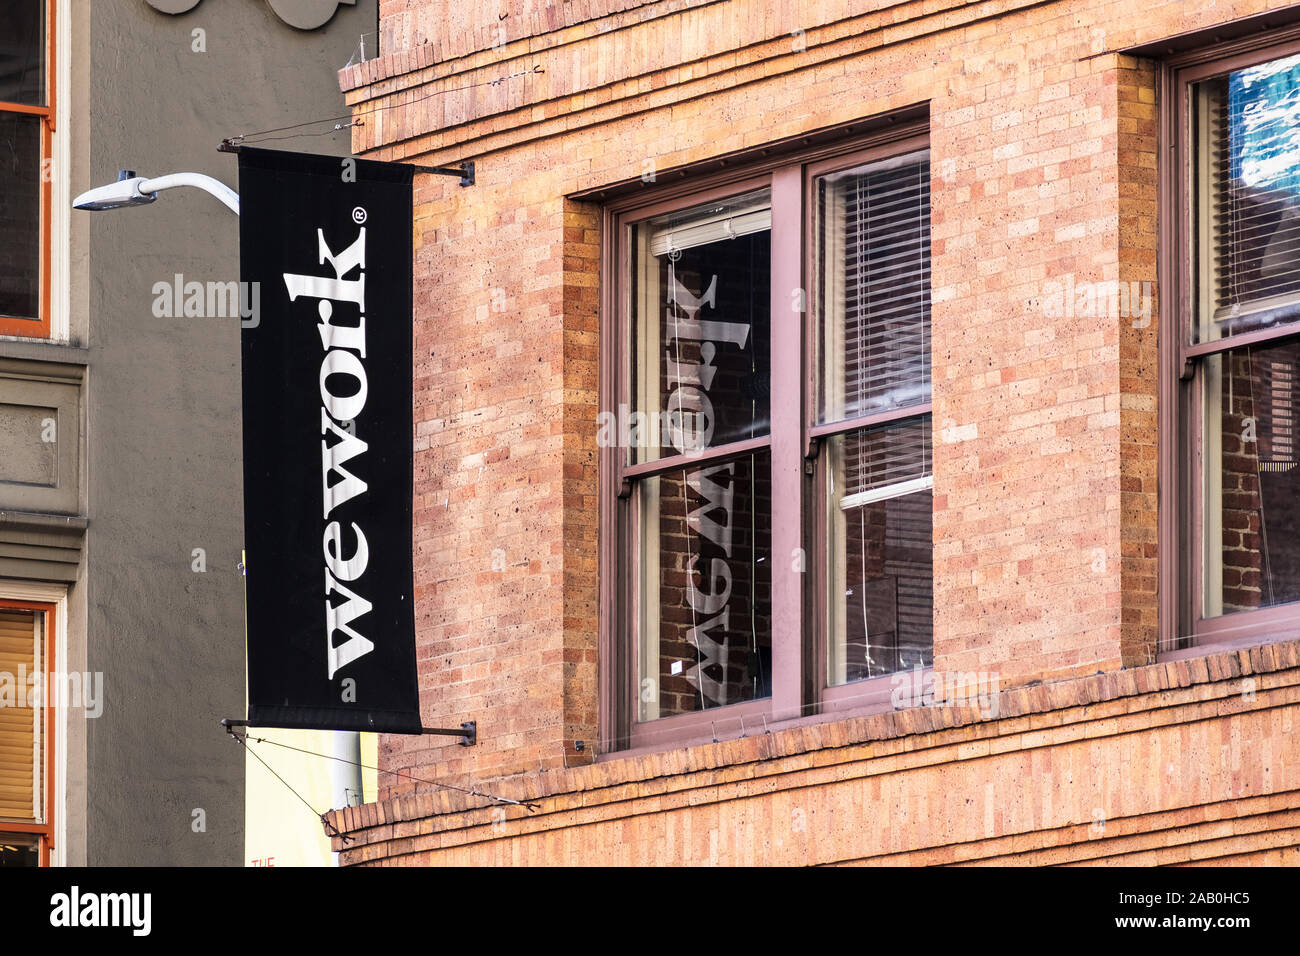 Nov 17, 2019 San Francisco / CA / USA - WeWork office building located in SOMA district; WeWork is an American company that provides shared work space Stock Photo